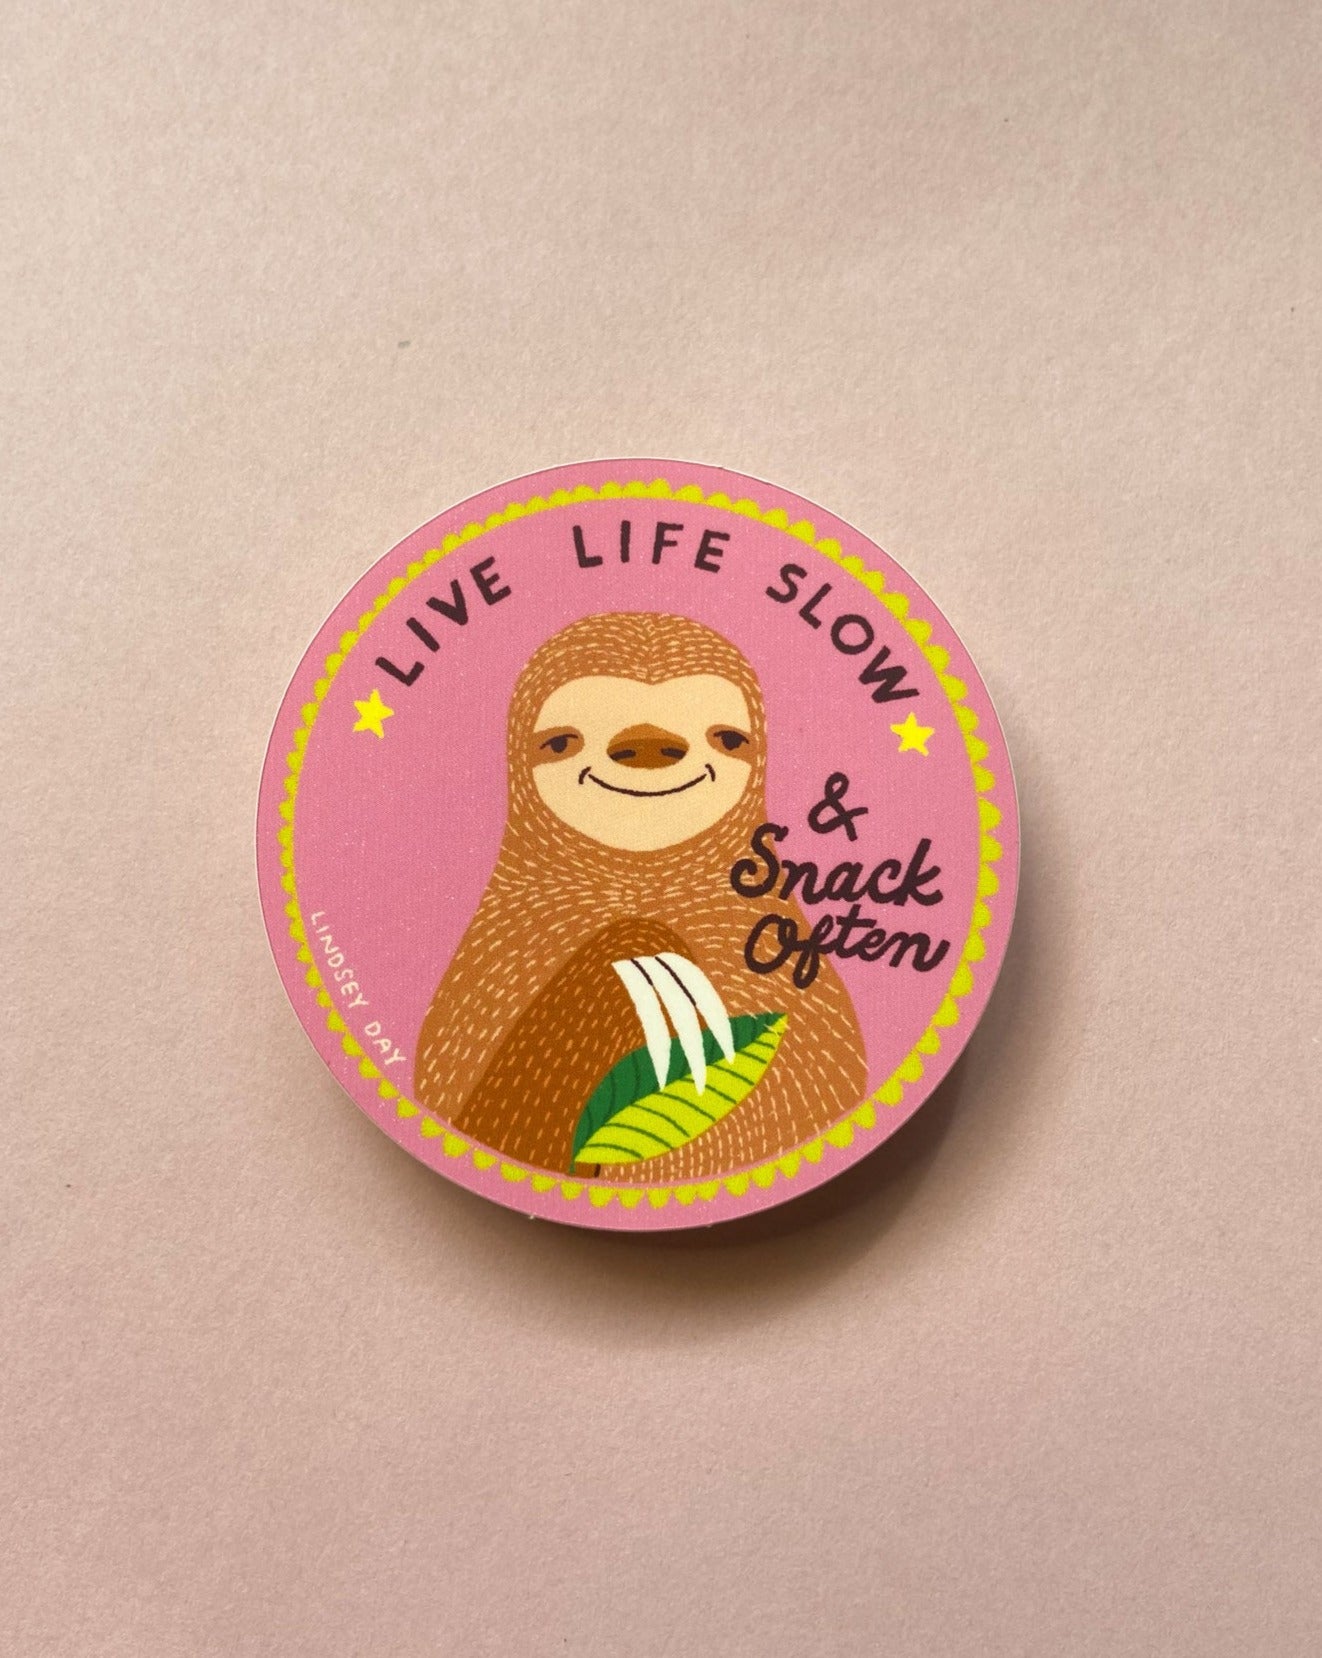 Live Life Slow Sticker, 3x3 in.